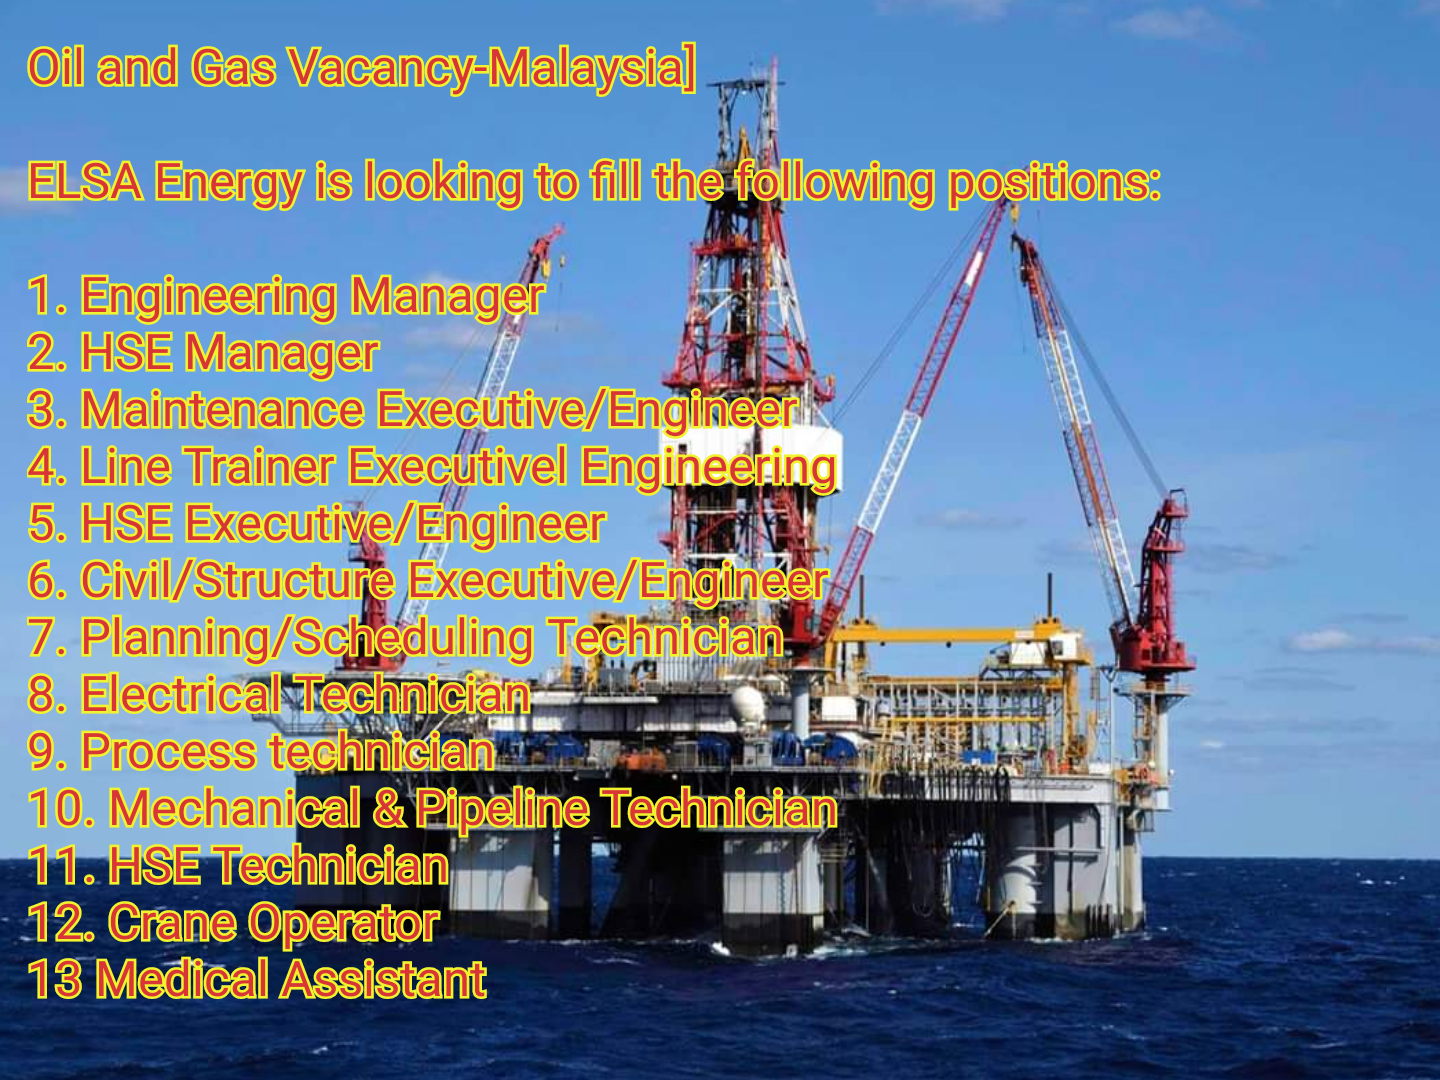 ELSA Energy is looking to fill the following positions: